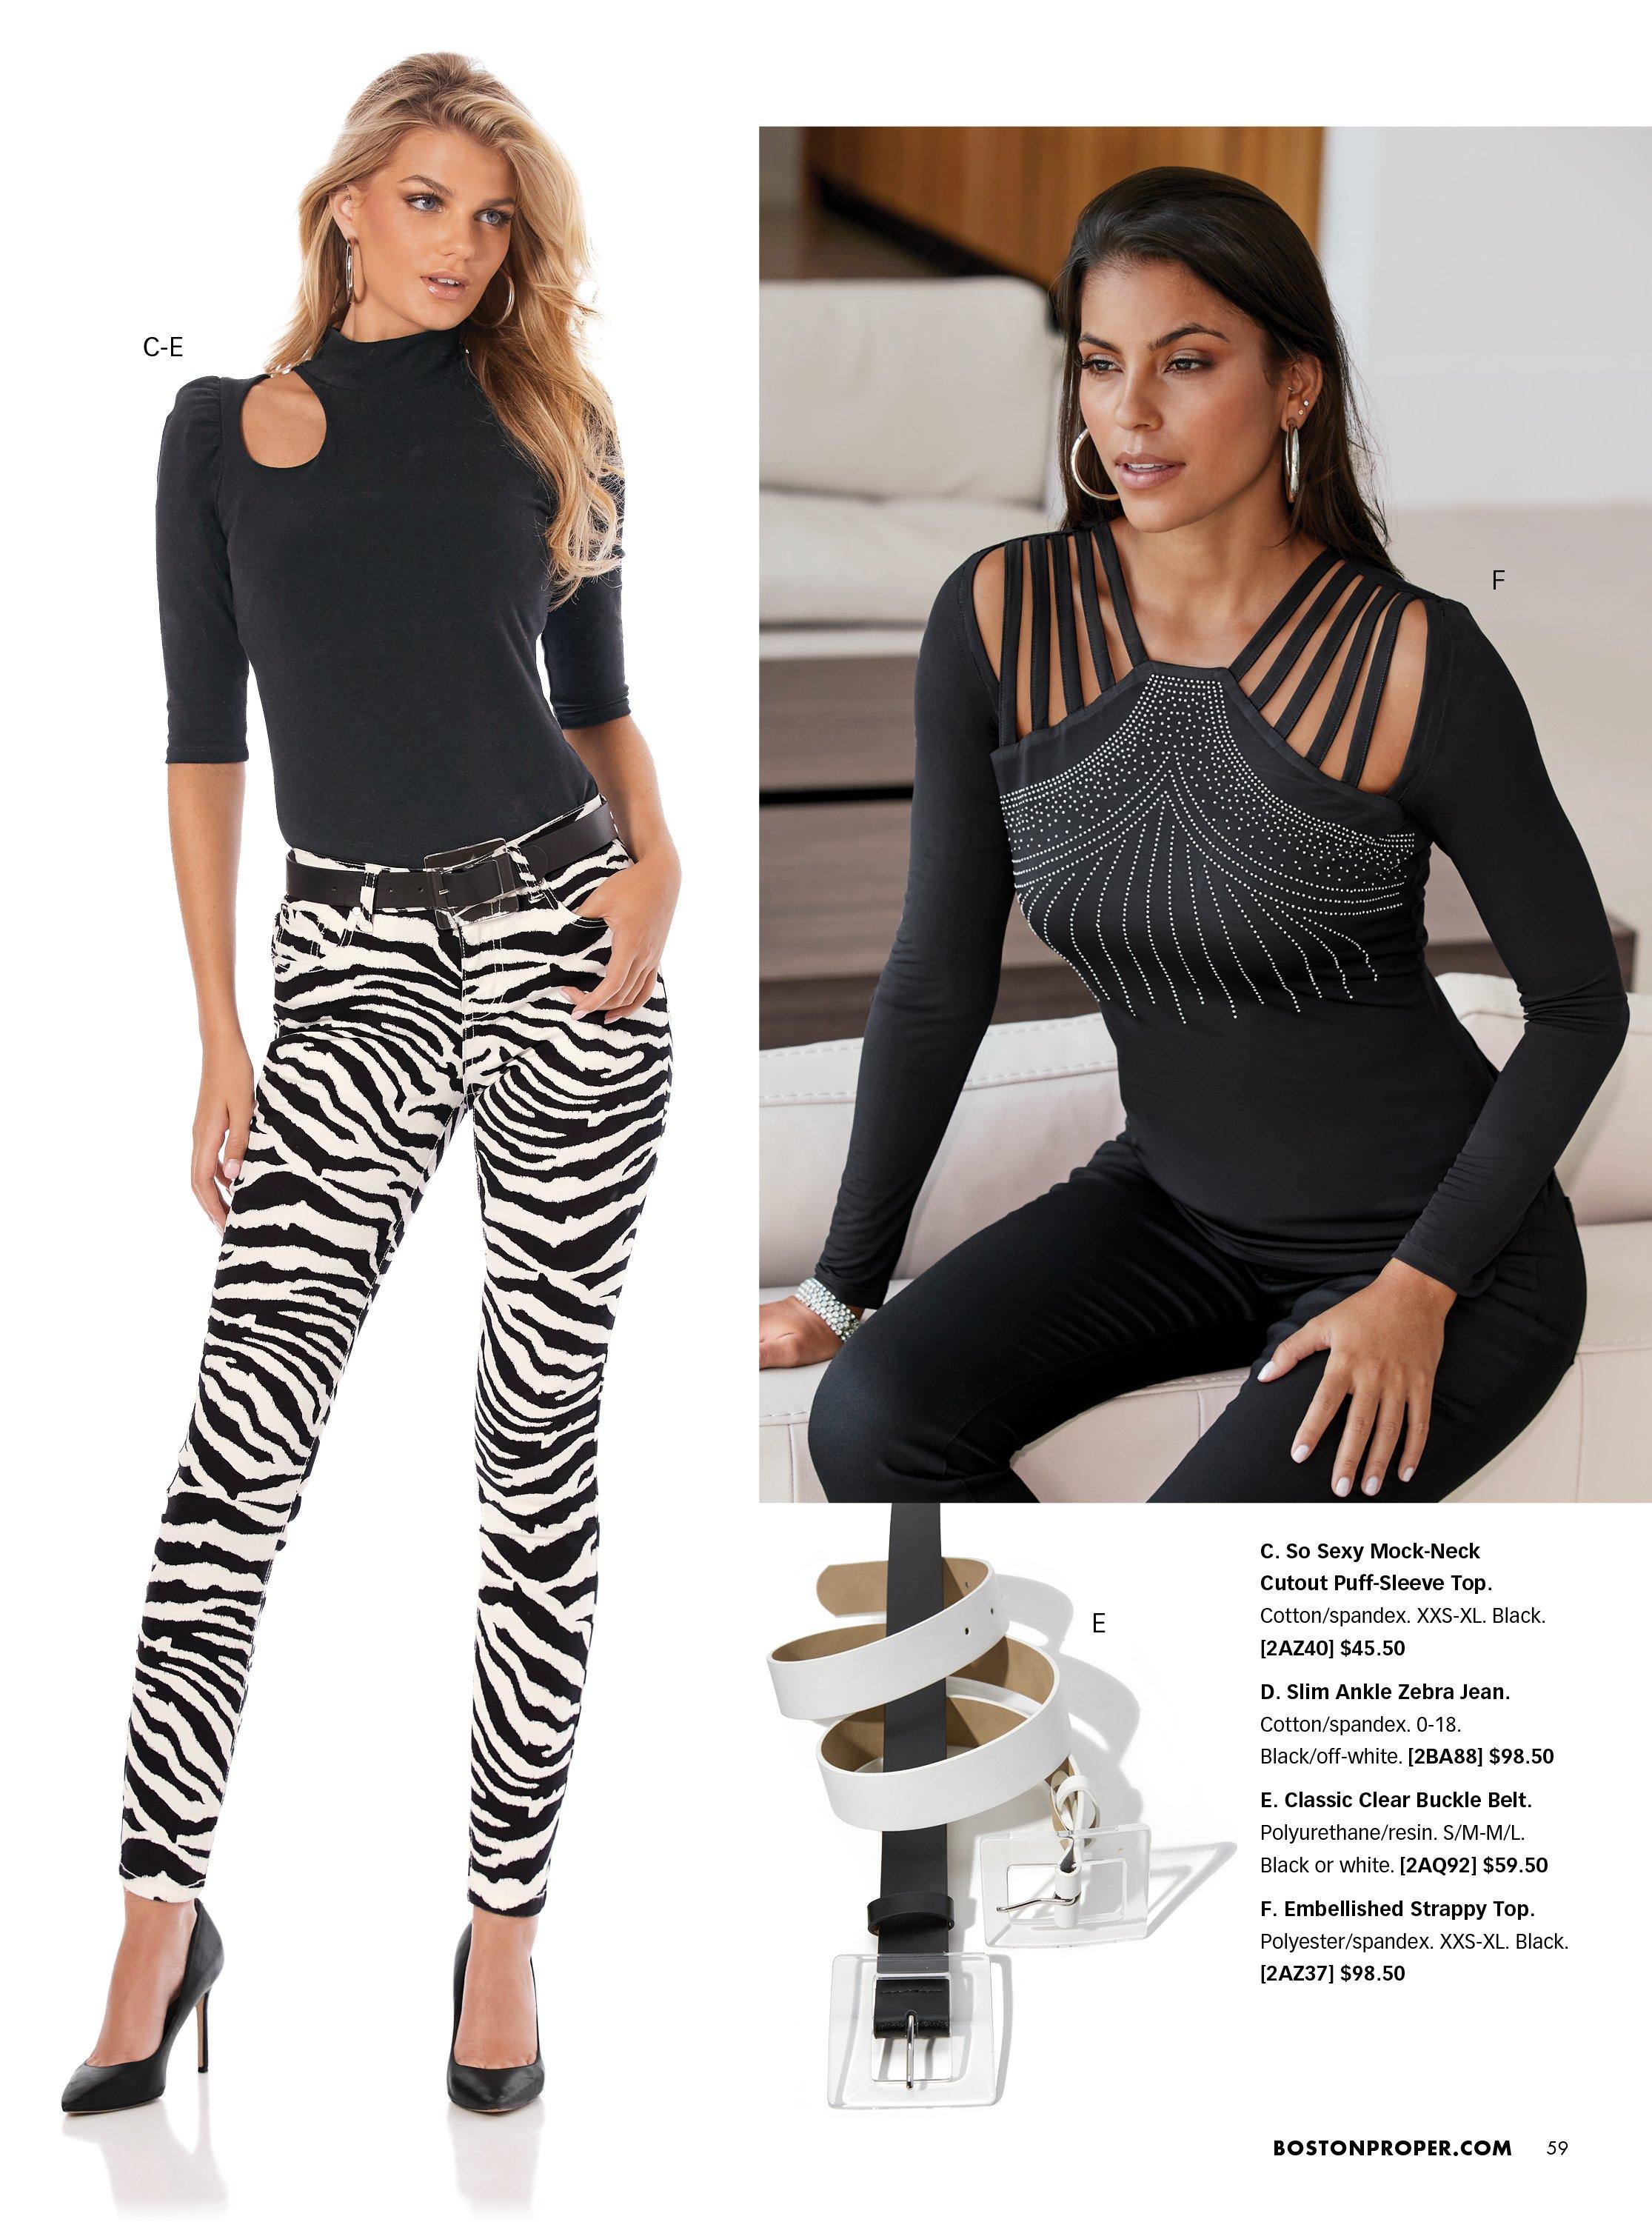 left model wearing a black cutout long-sleeve top, black belt, zebra striped jeans, and black heels. right model wearing a black strappy long-sleeve top with jewel embellishments and black pants. also shown: black belt and white belt.